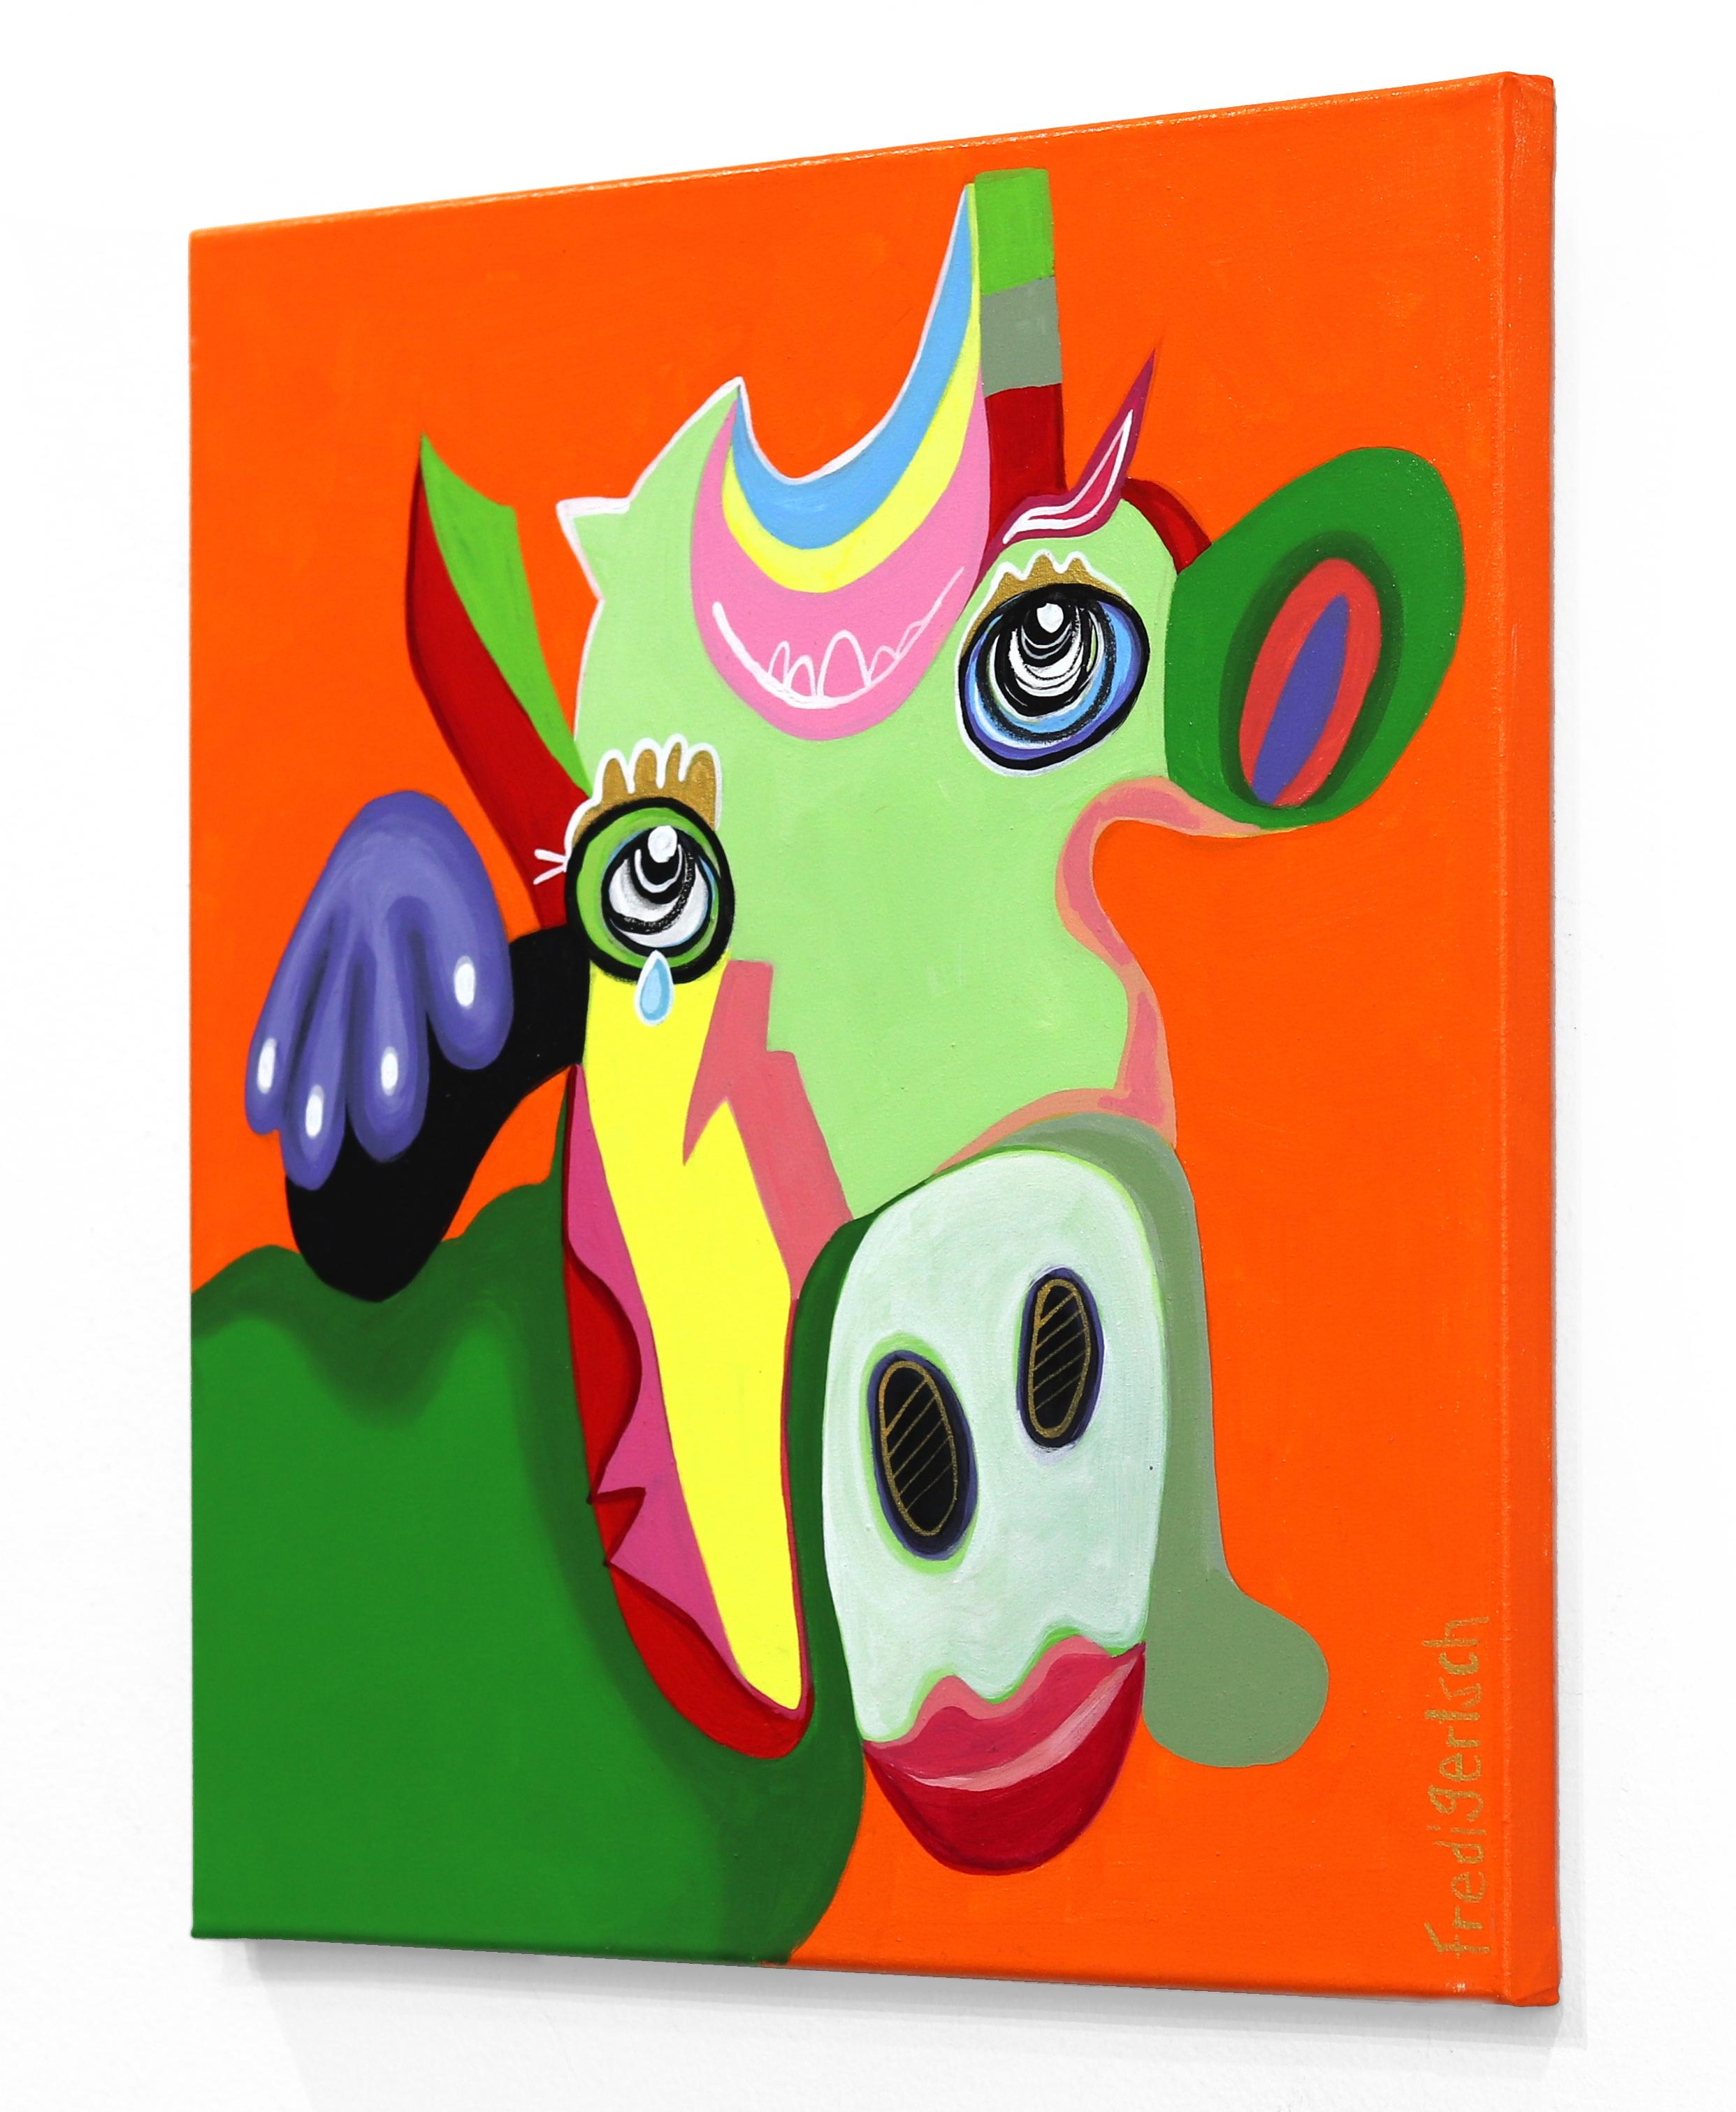 Swiss artist Fredi Gertsch creates lively colorful pop-folk art paintings with one inexhaustible element: the Emmentaler cow. Humor and optimism are essential traits of the artist: 